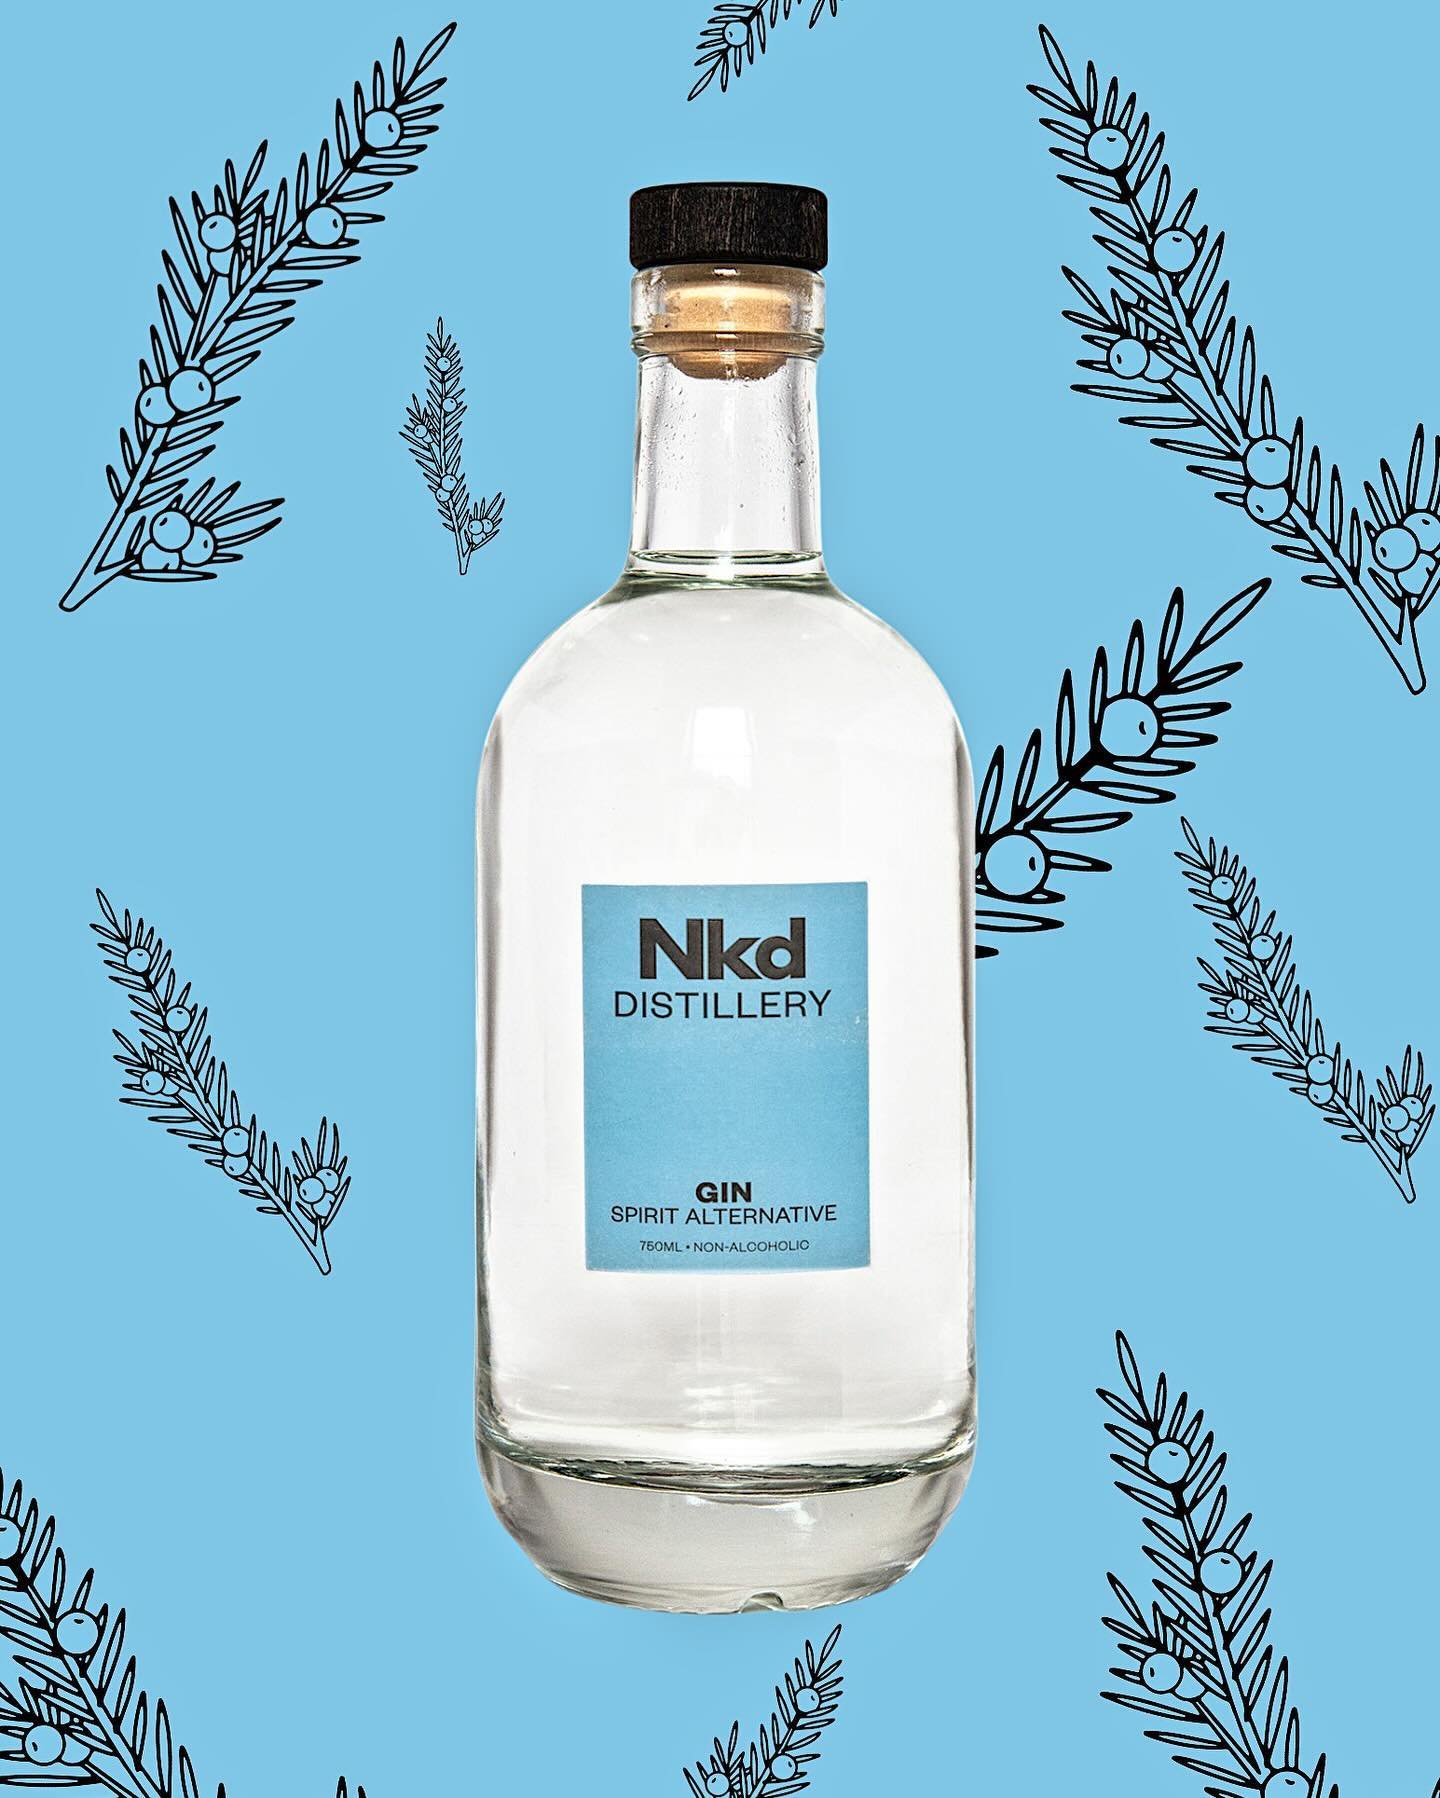 Nkd Gin. Increased intensity for 1:1 cocktail swap. Keep it simple or make it interesting-we bring the flavor you're looking for. 

Fresh piney flavor with citrus and spice. 
👅Juniper on the front, spicy coriander and earth on the back. 
👃Citrus pe